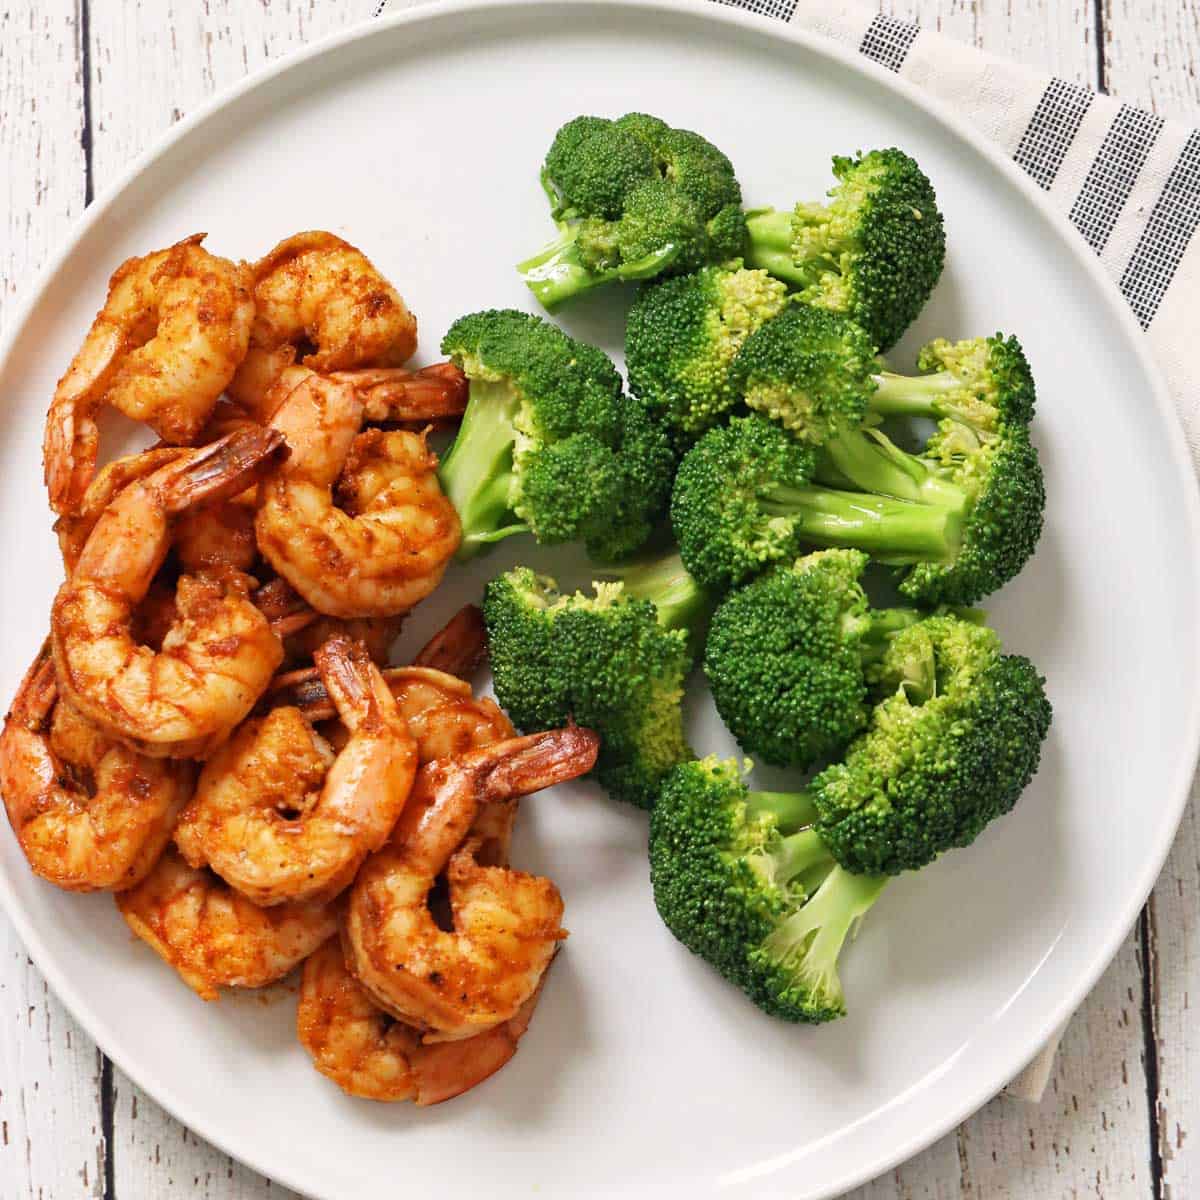 Steamed broccoli is served with sauteed shrimp.